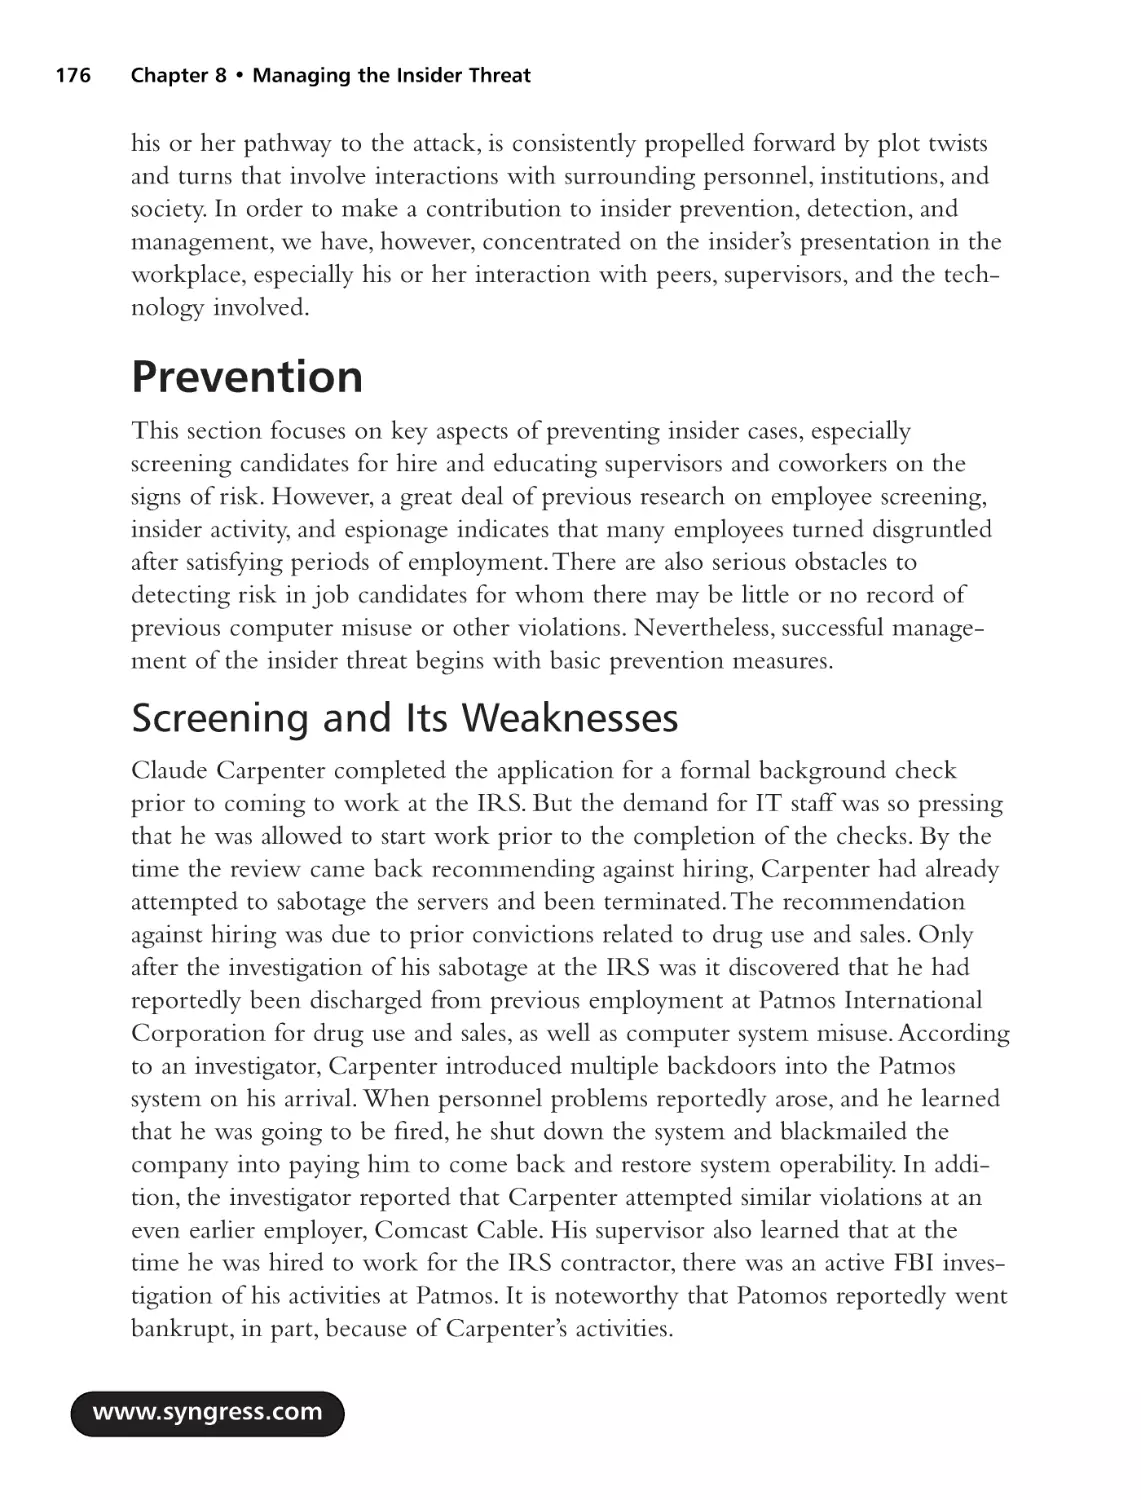 Prevention
Screening and Its Weaknesses